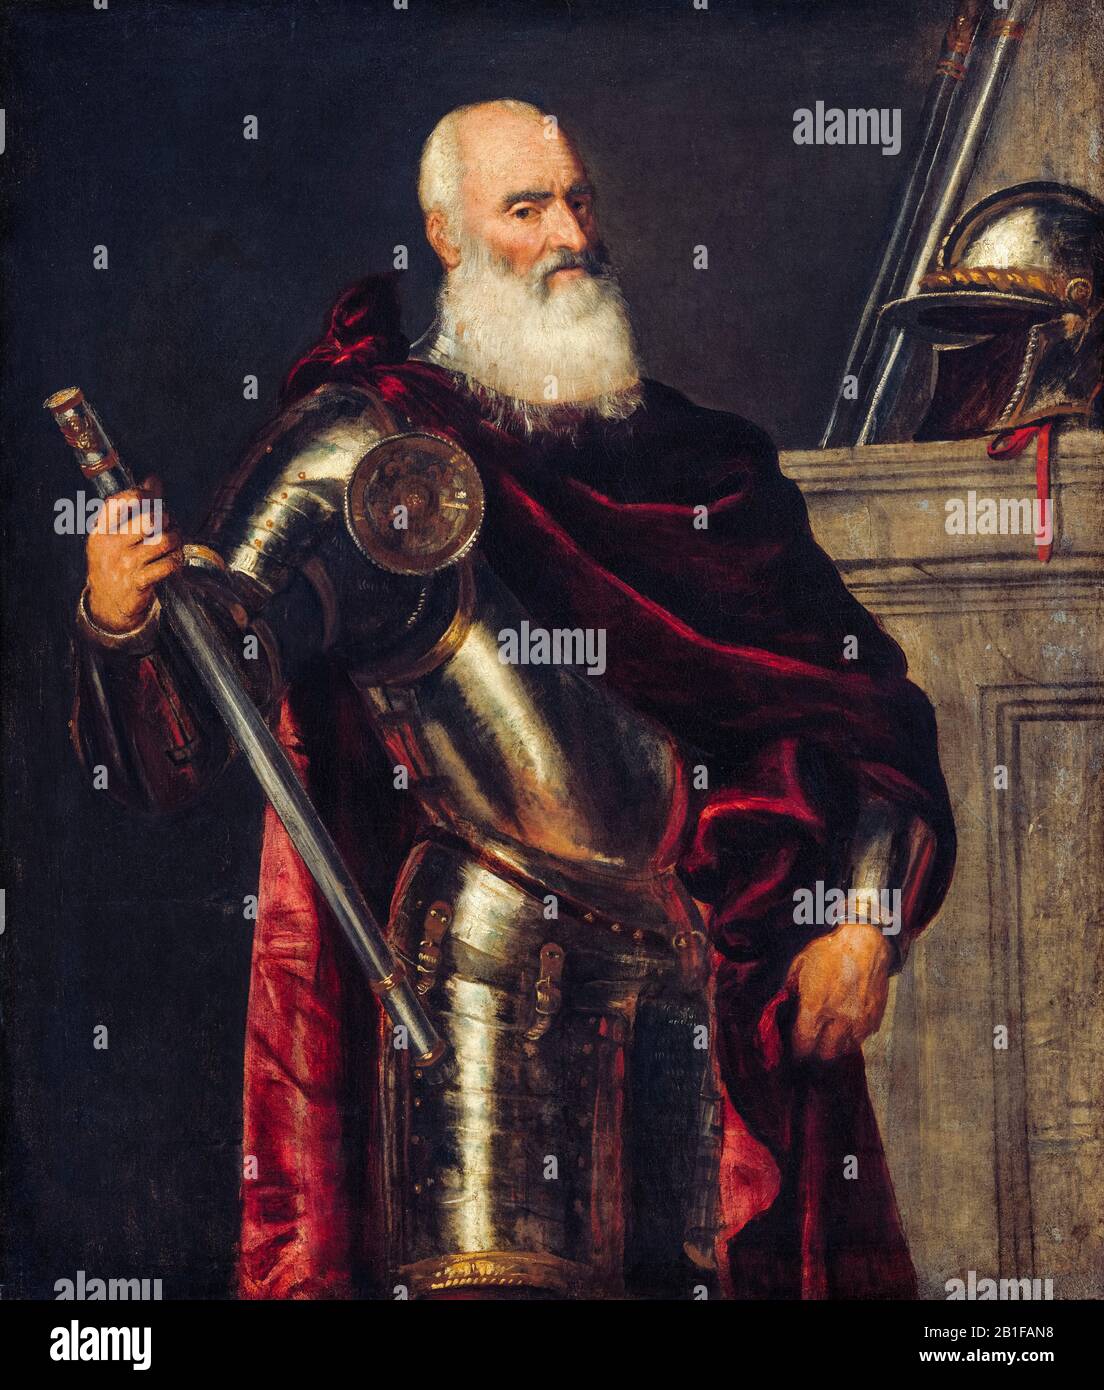 Vincenzo Cappello (1469-1541), Venetian Navy Admiral, full armour, portrait painting by Titian, circa 1540 Stock Photo